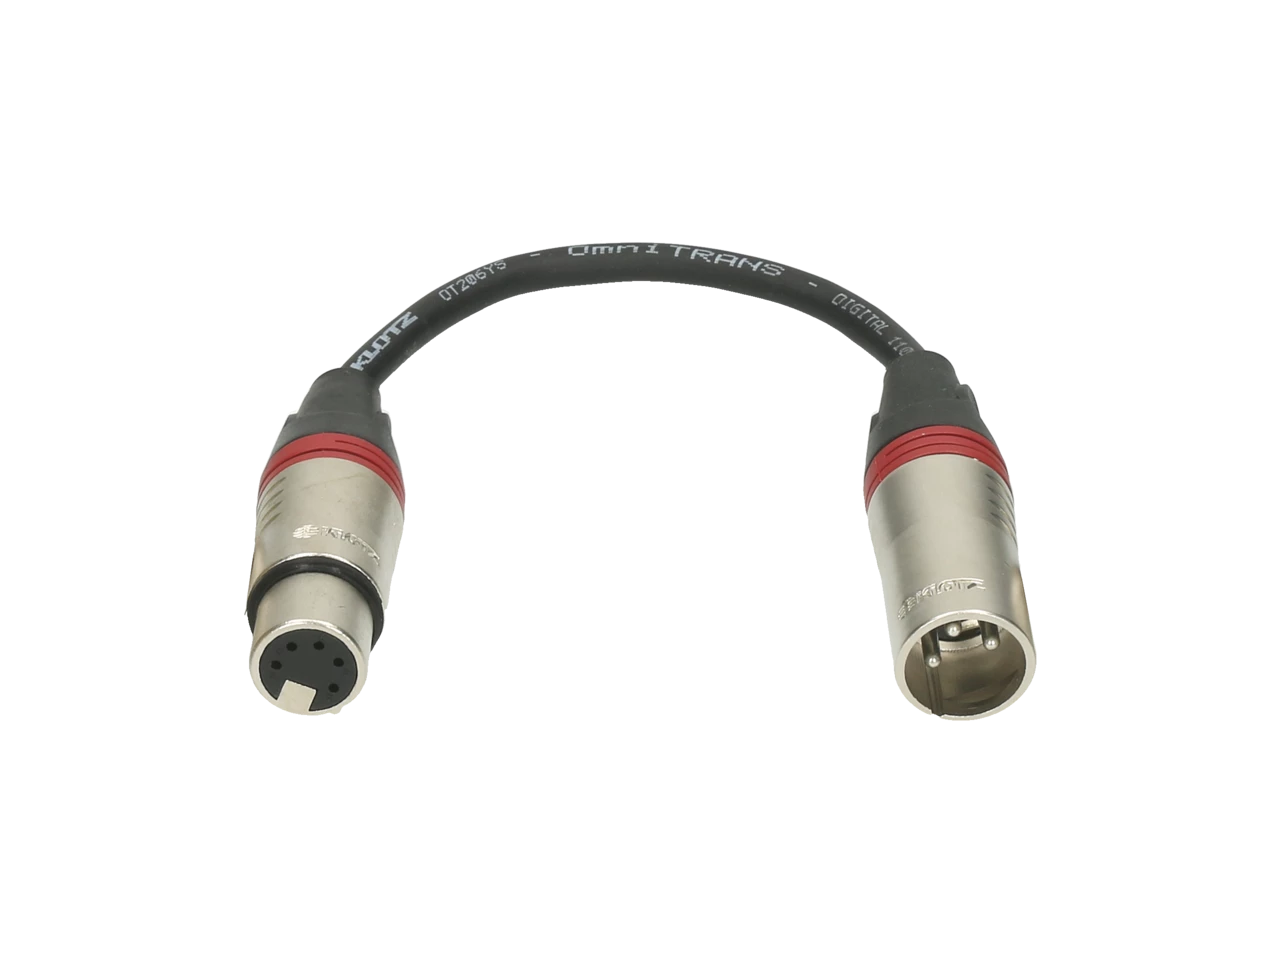 DMX Cable Assembly XLR 3-Pin Plug to Jack